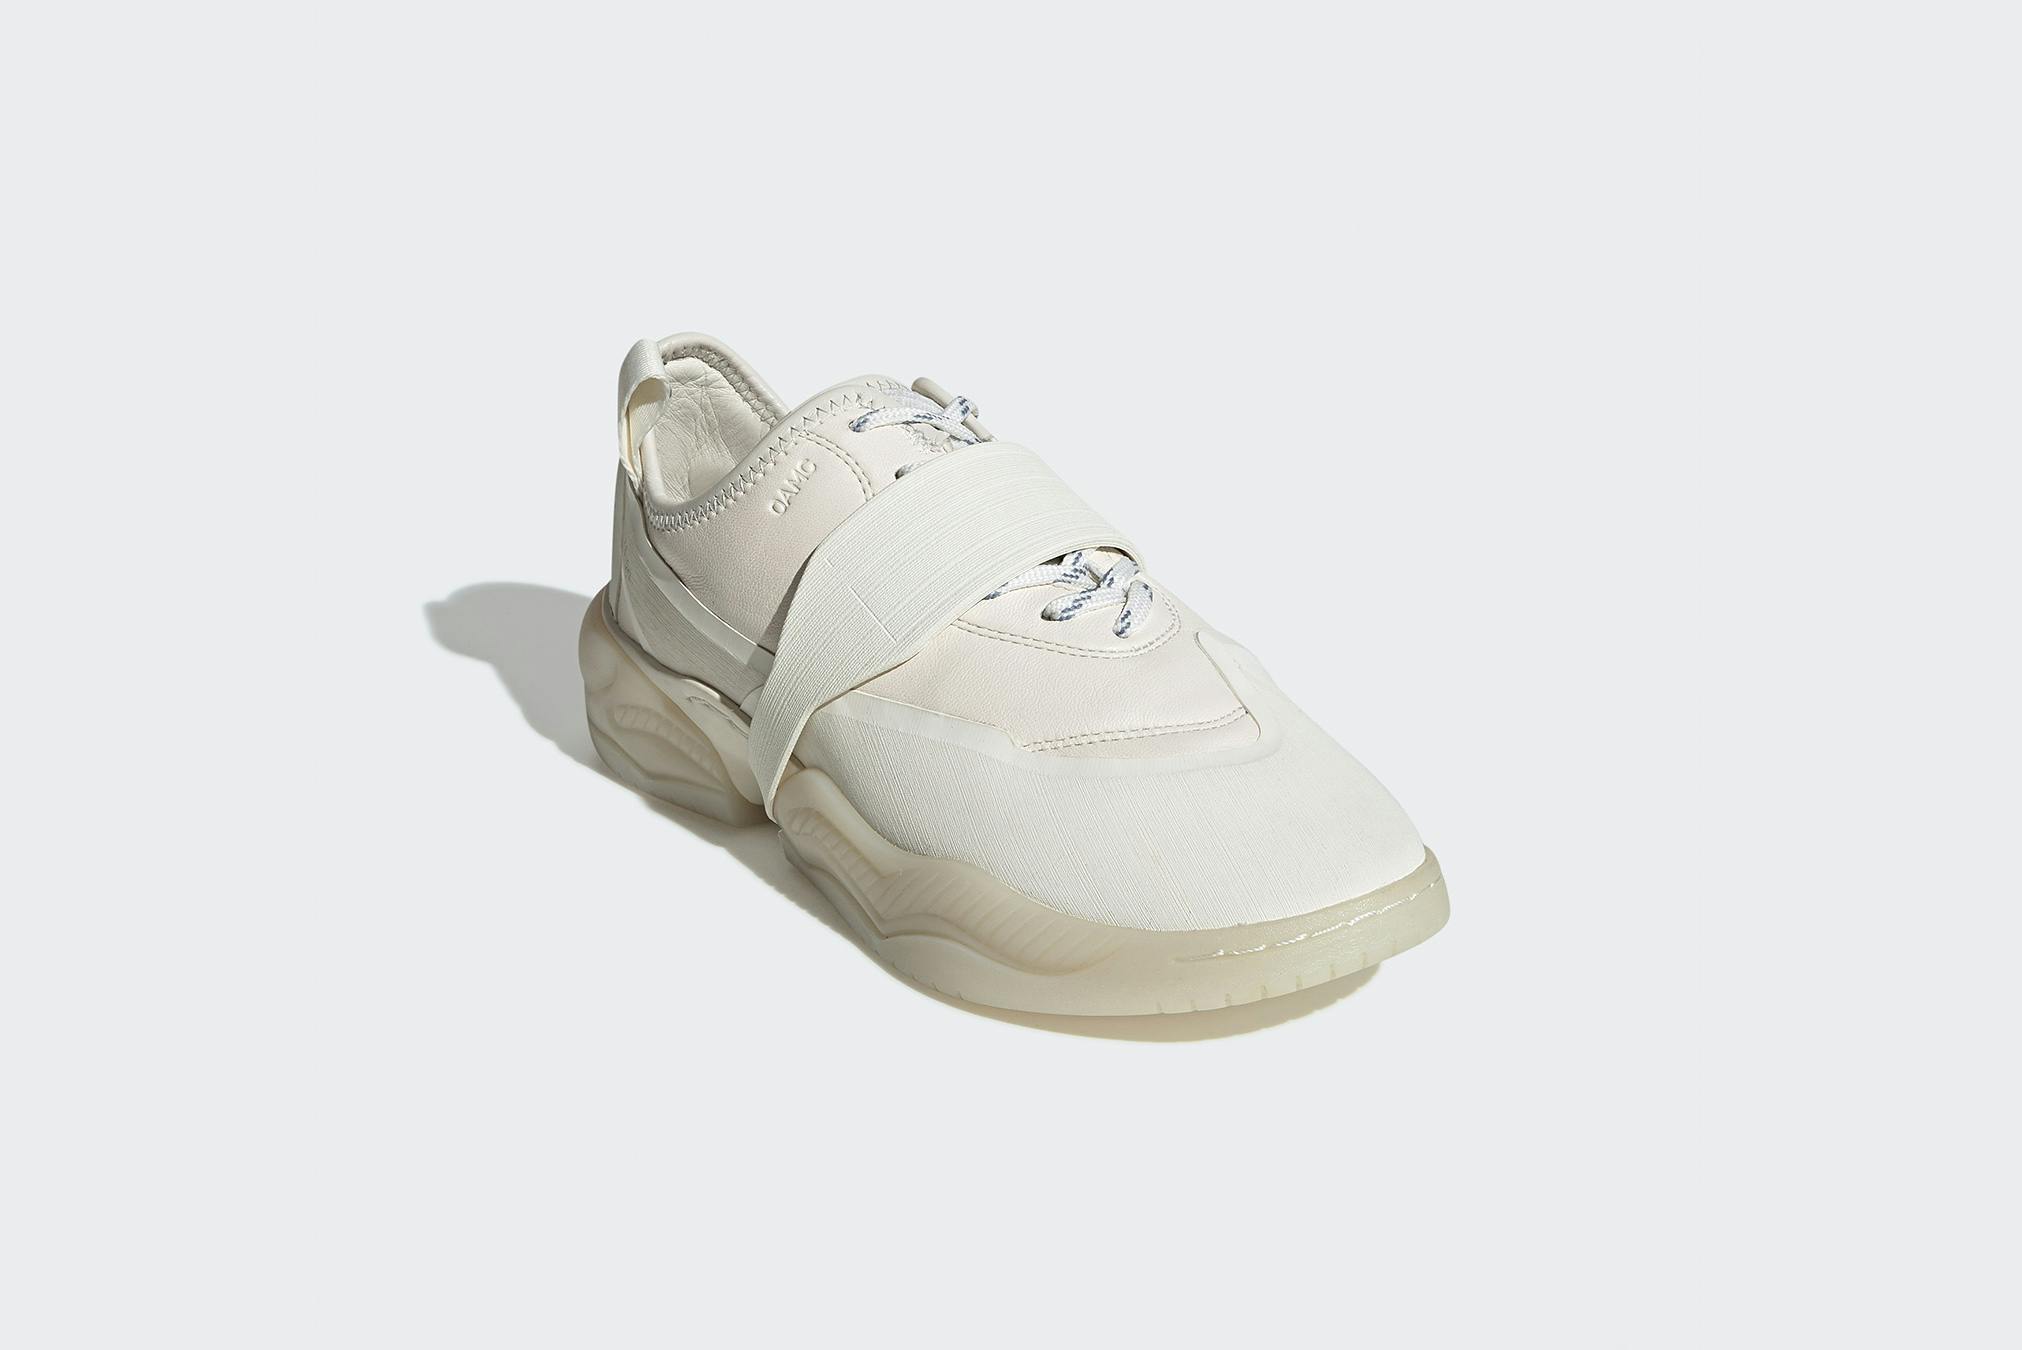 adidas Originals by OAMC - Register Now on END. Launches | END.